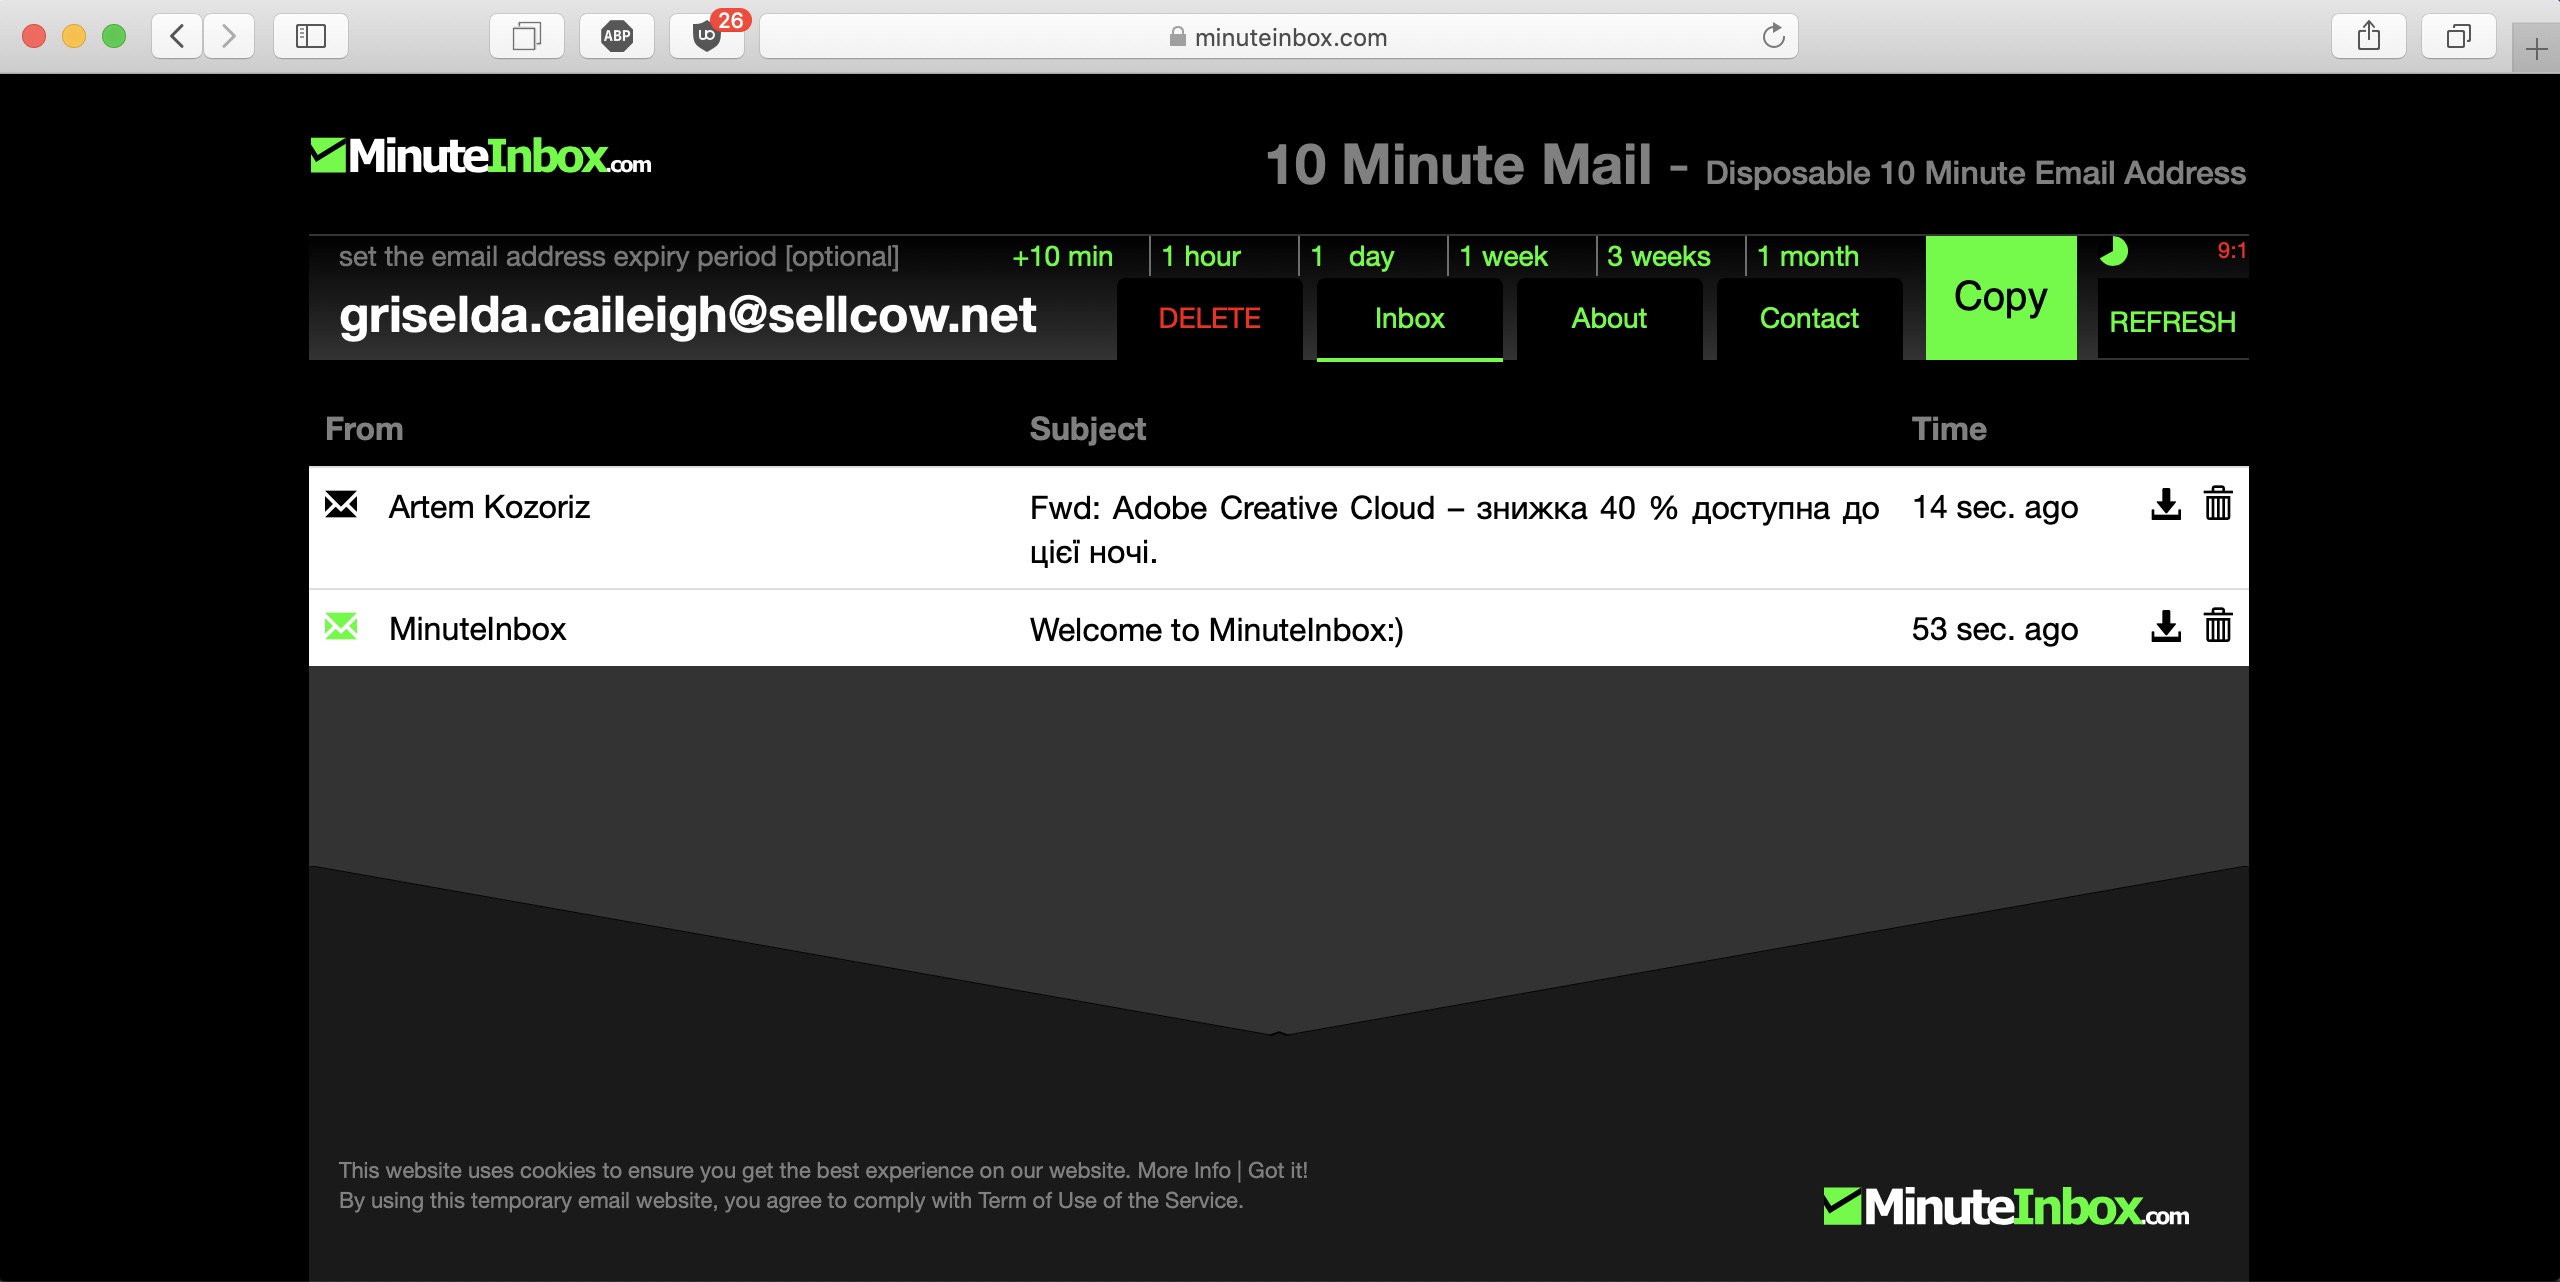 Most web uses. 5min mail. 2 Minute mail. 50 Sec ago.